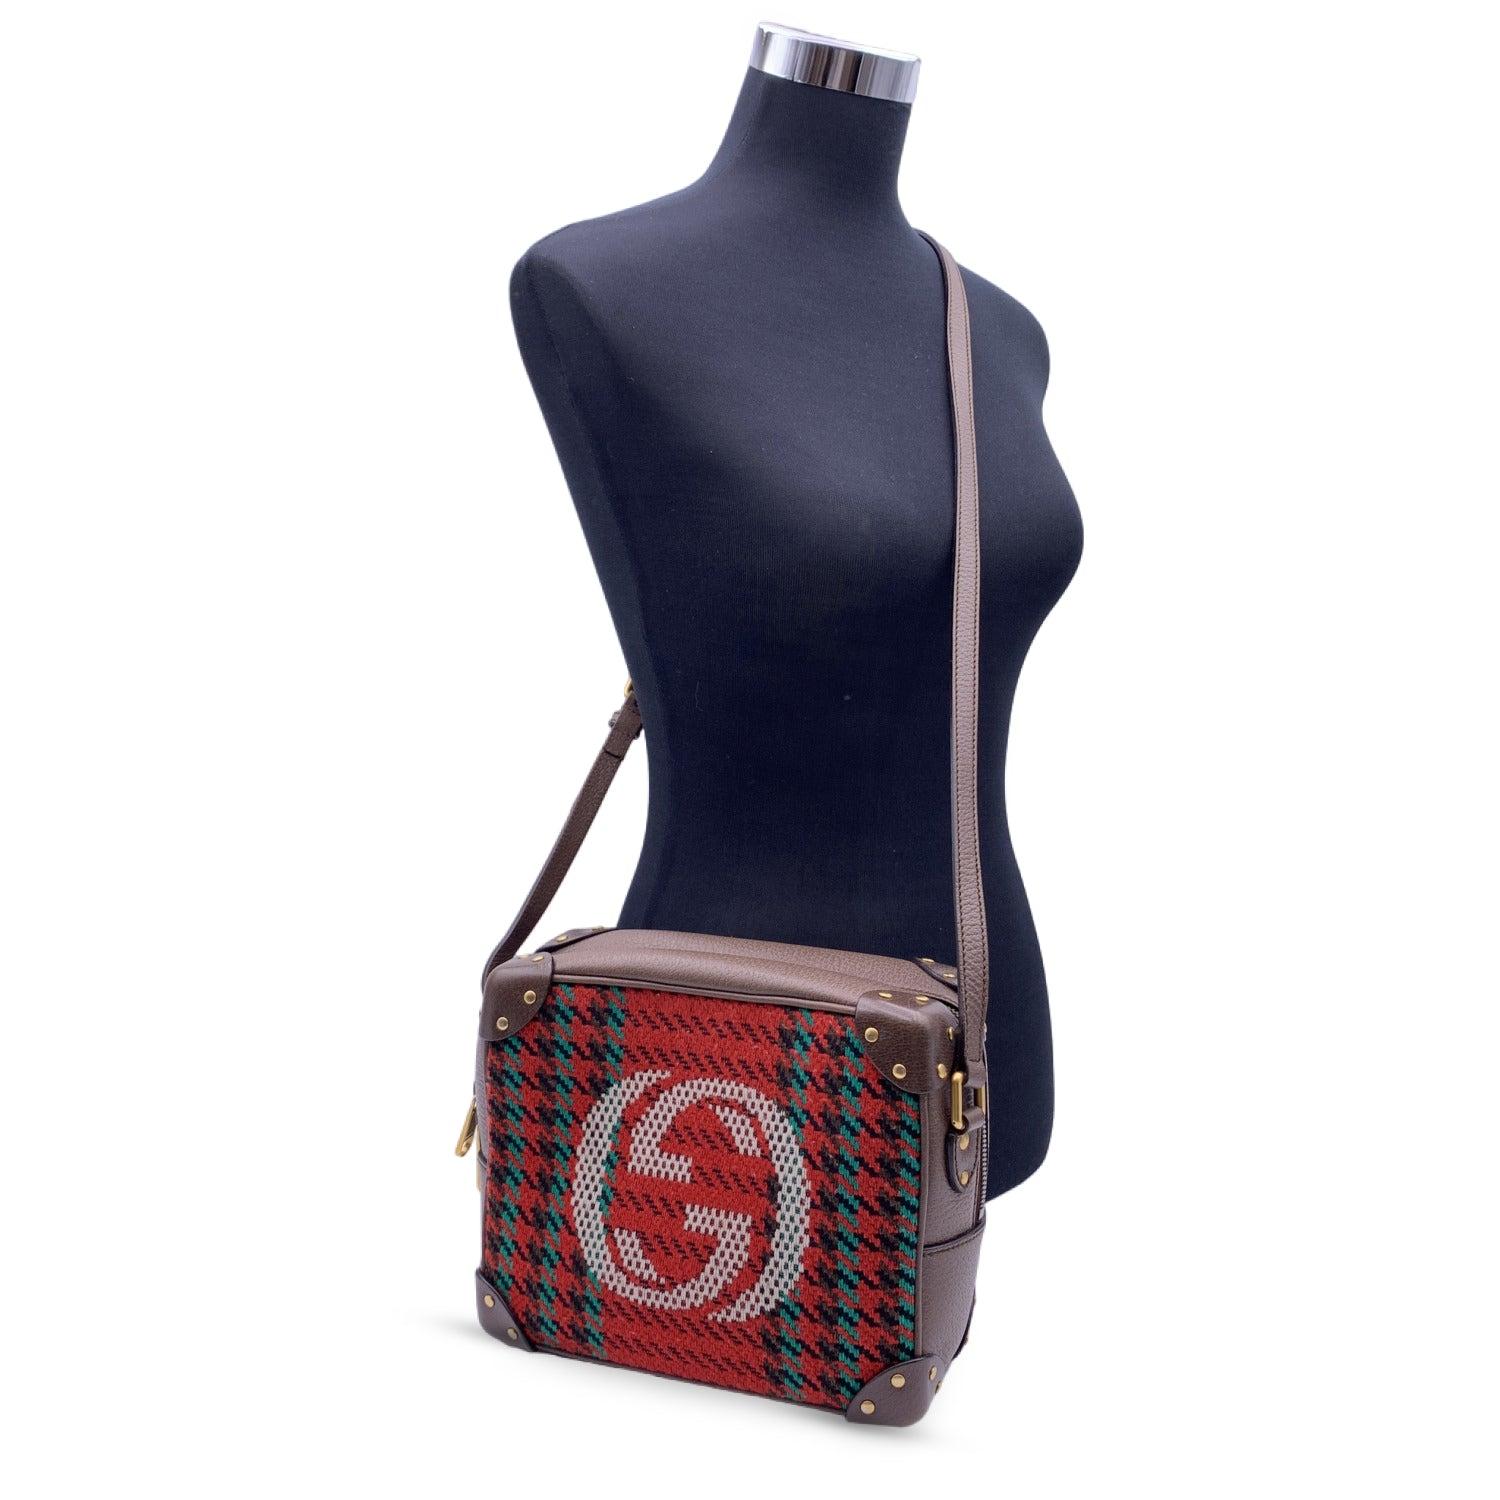 This beautiful Bag will come with a Certificate of Authenticity provided by Entrupy. The certificate will be provided at no further cost. Gucci shoulder bag crafted in red, black, green and brown houndstooth wool with gr brown leather trim and